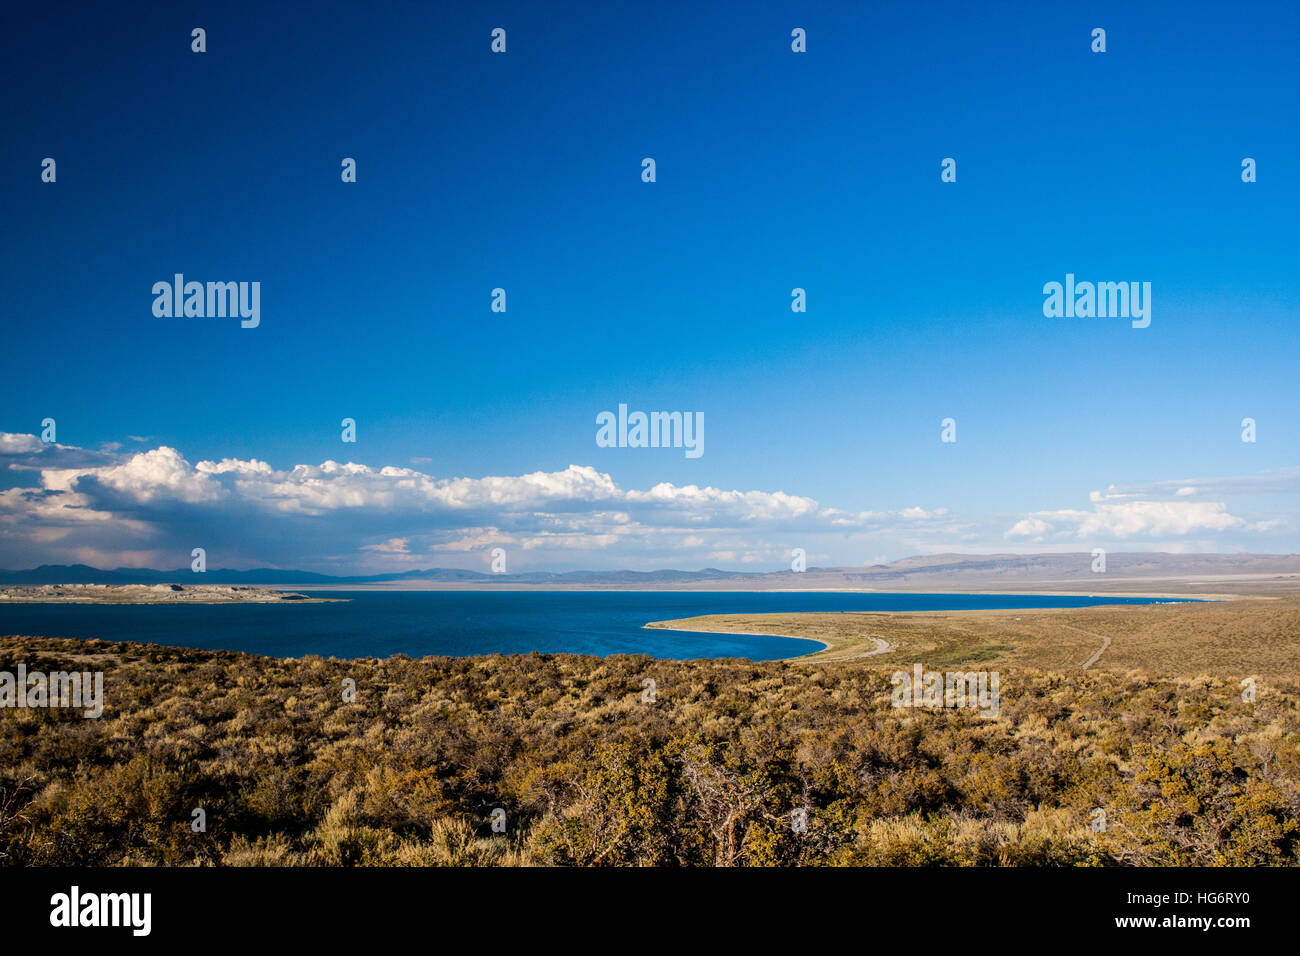 Mono Lake is a large, shallow saline soda lake in Mono County, California, formed at least 760,000 years ago as a terminal lake in an endorheic basin. Stock Photo